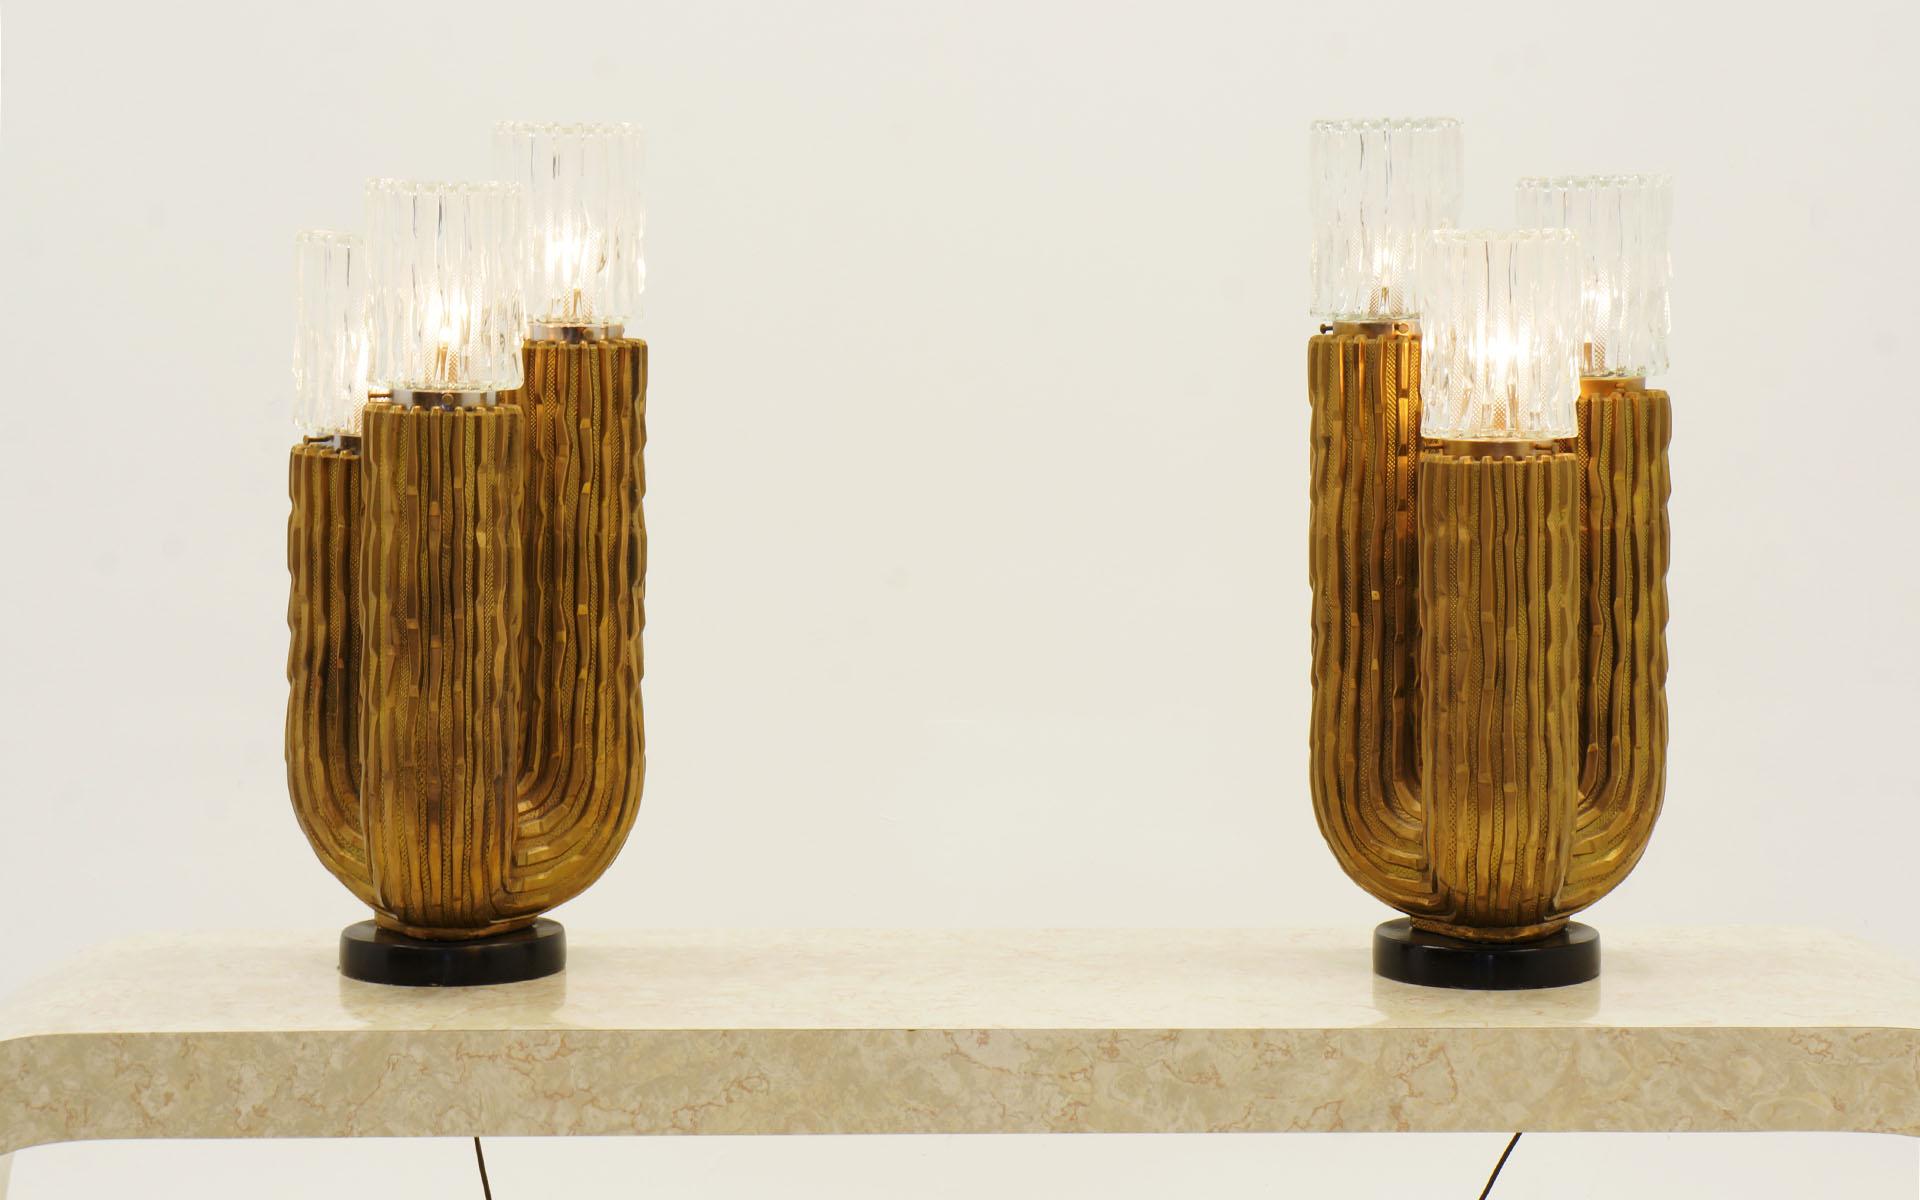 Pair of cactus lamps by Fuggiti Studios. The lamps feature three glass shades and bodies made of plaster with gold leaf. The glass shades are the same design and texture as the bases. A unique and striking set.